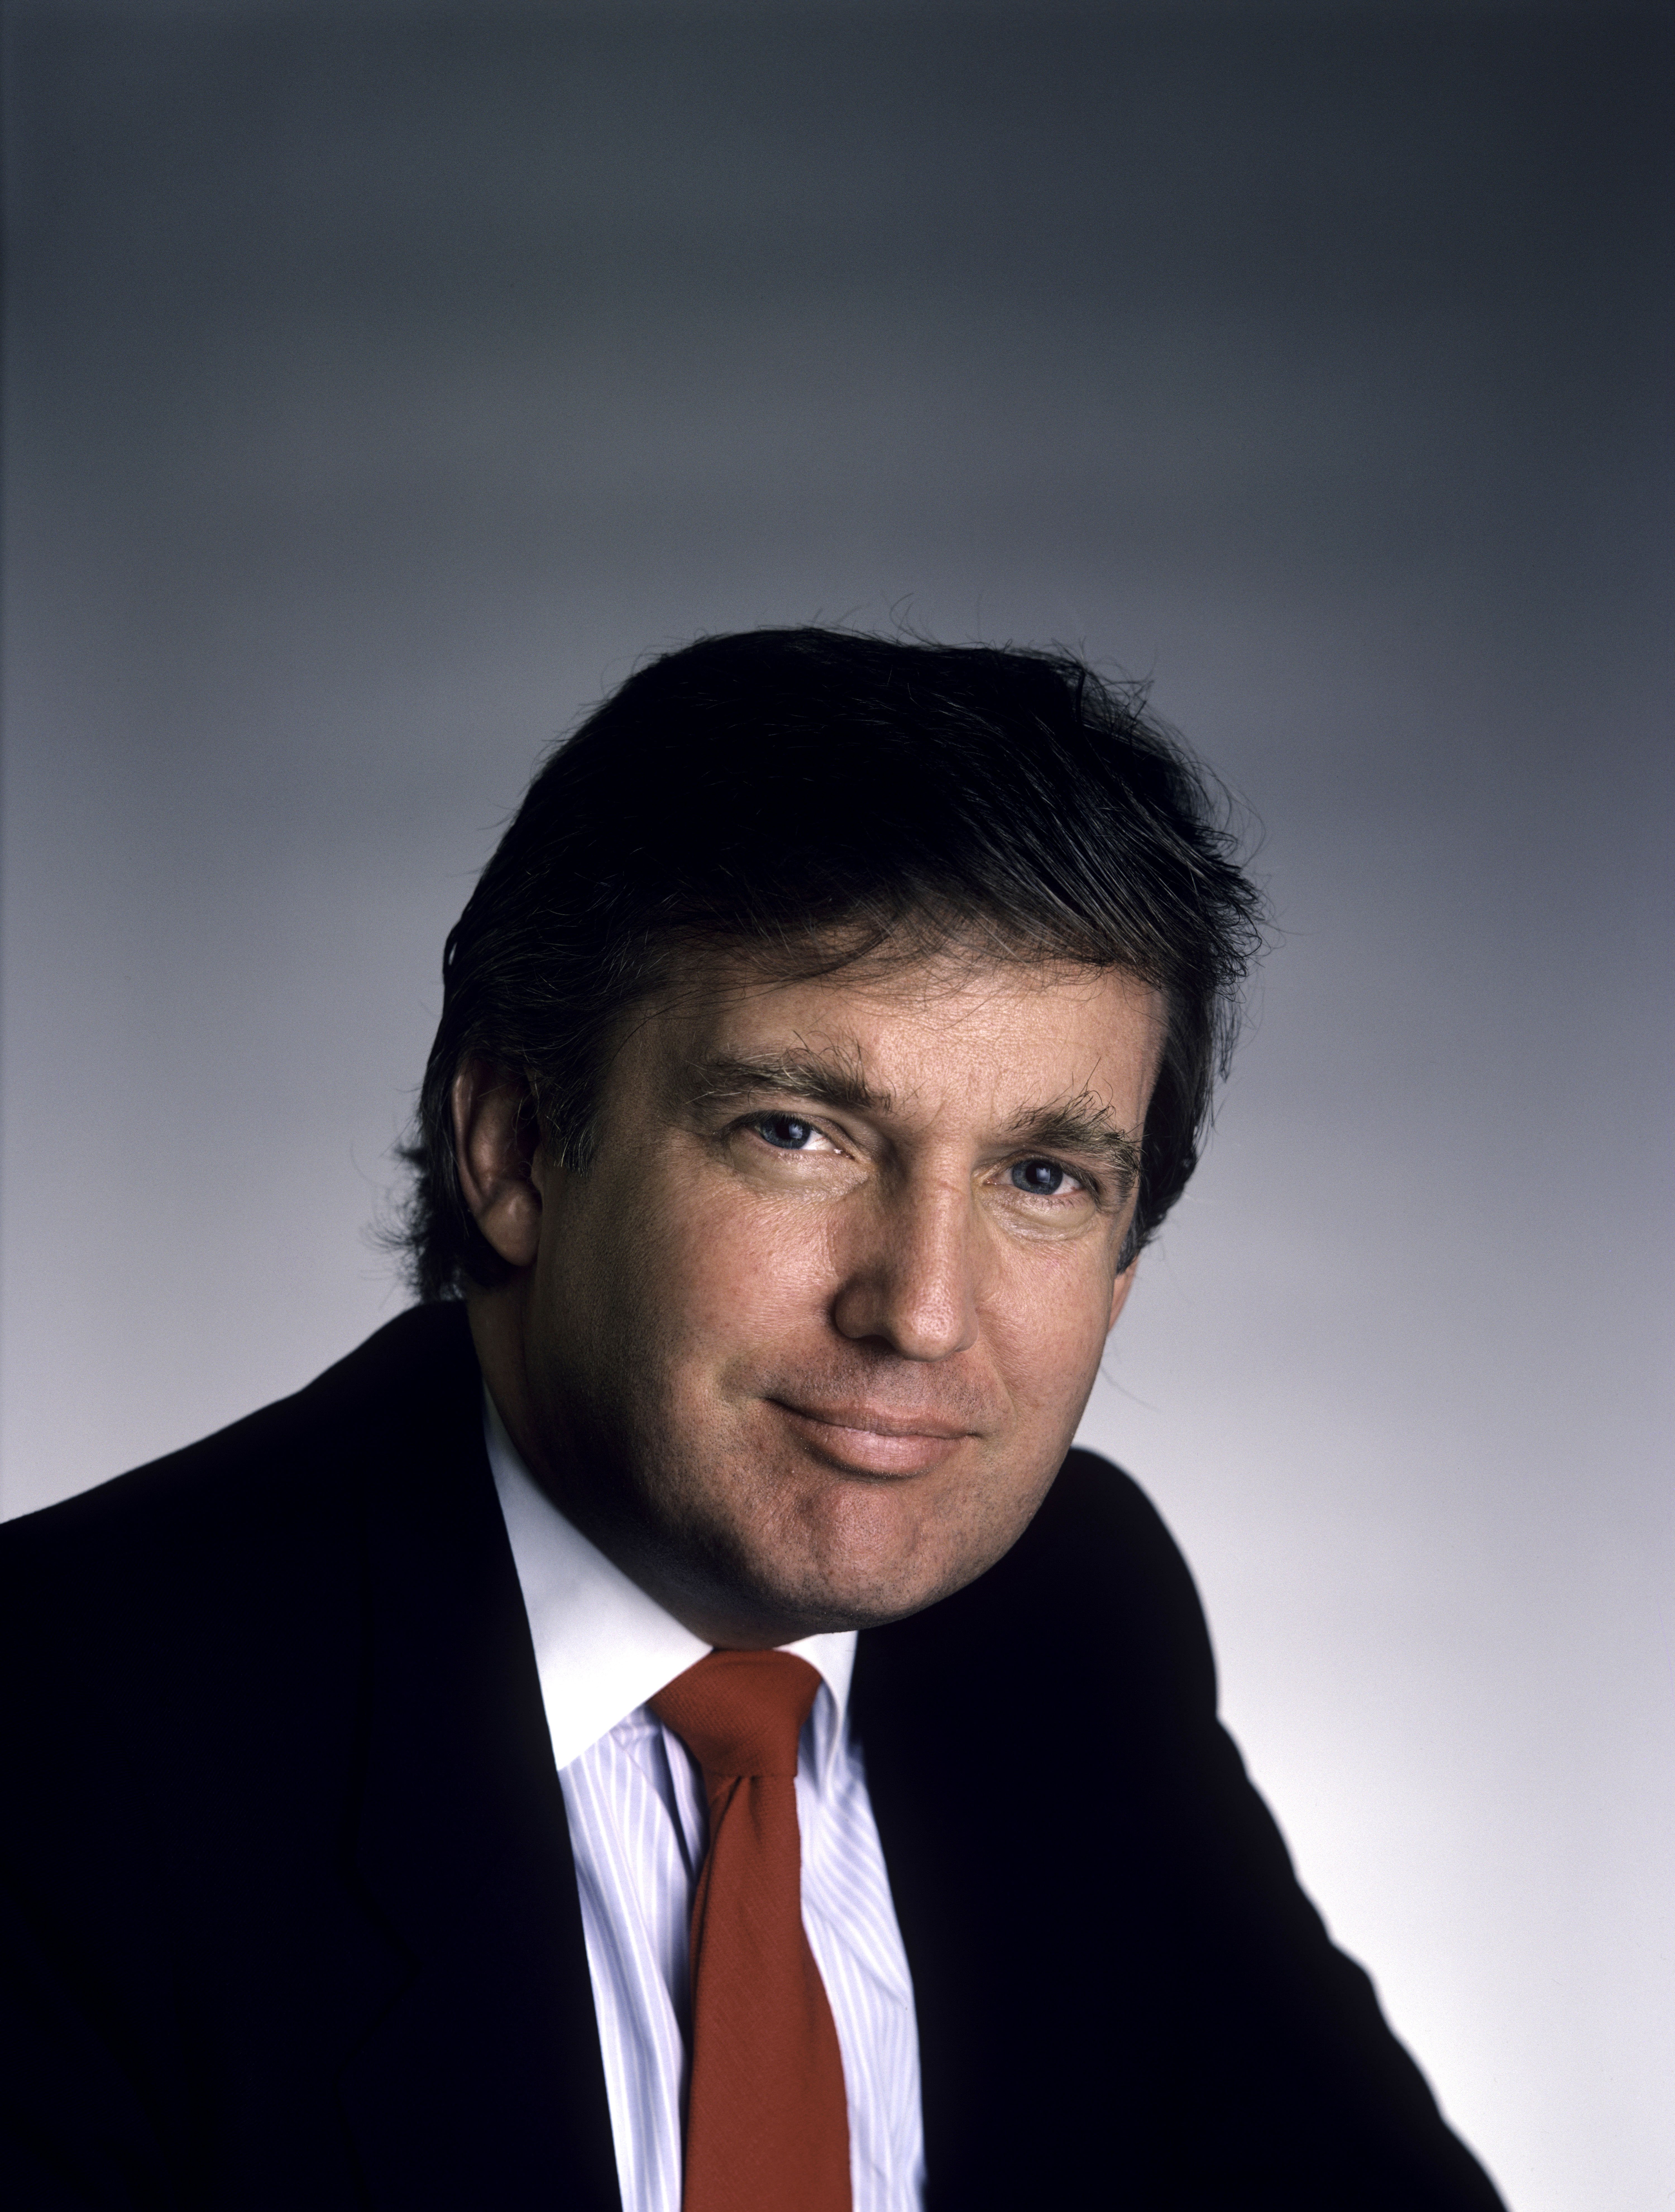 President Donald Trump in his younger days with brown hair | Photo: Getty Images